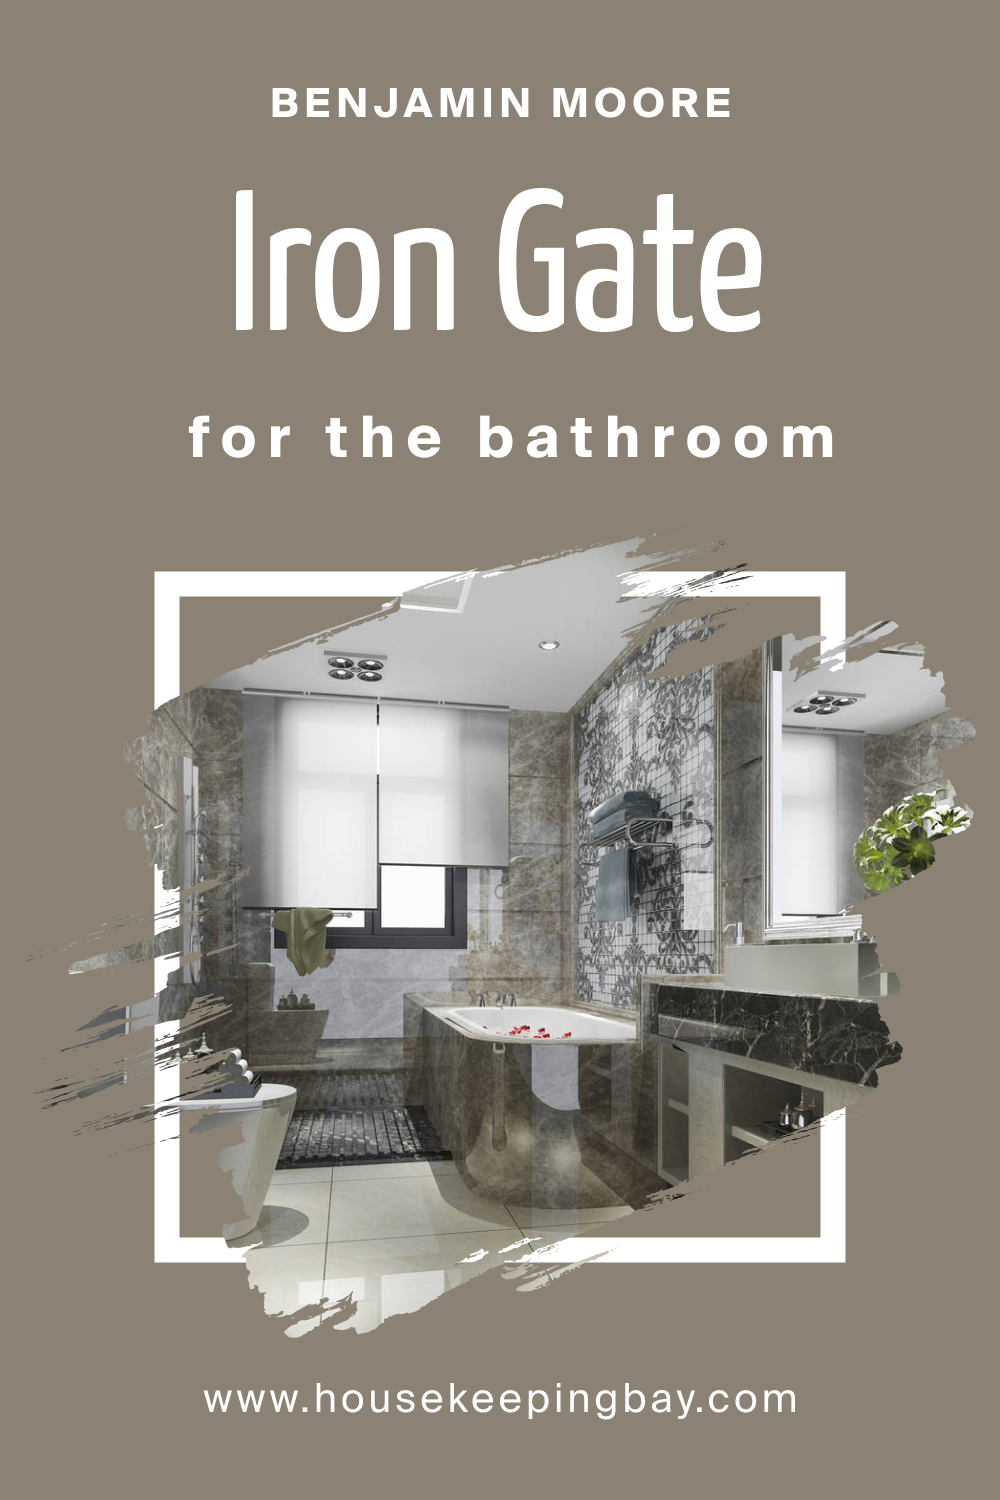 How to Use BM Iron Gate 1545 in the Bathroom?